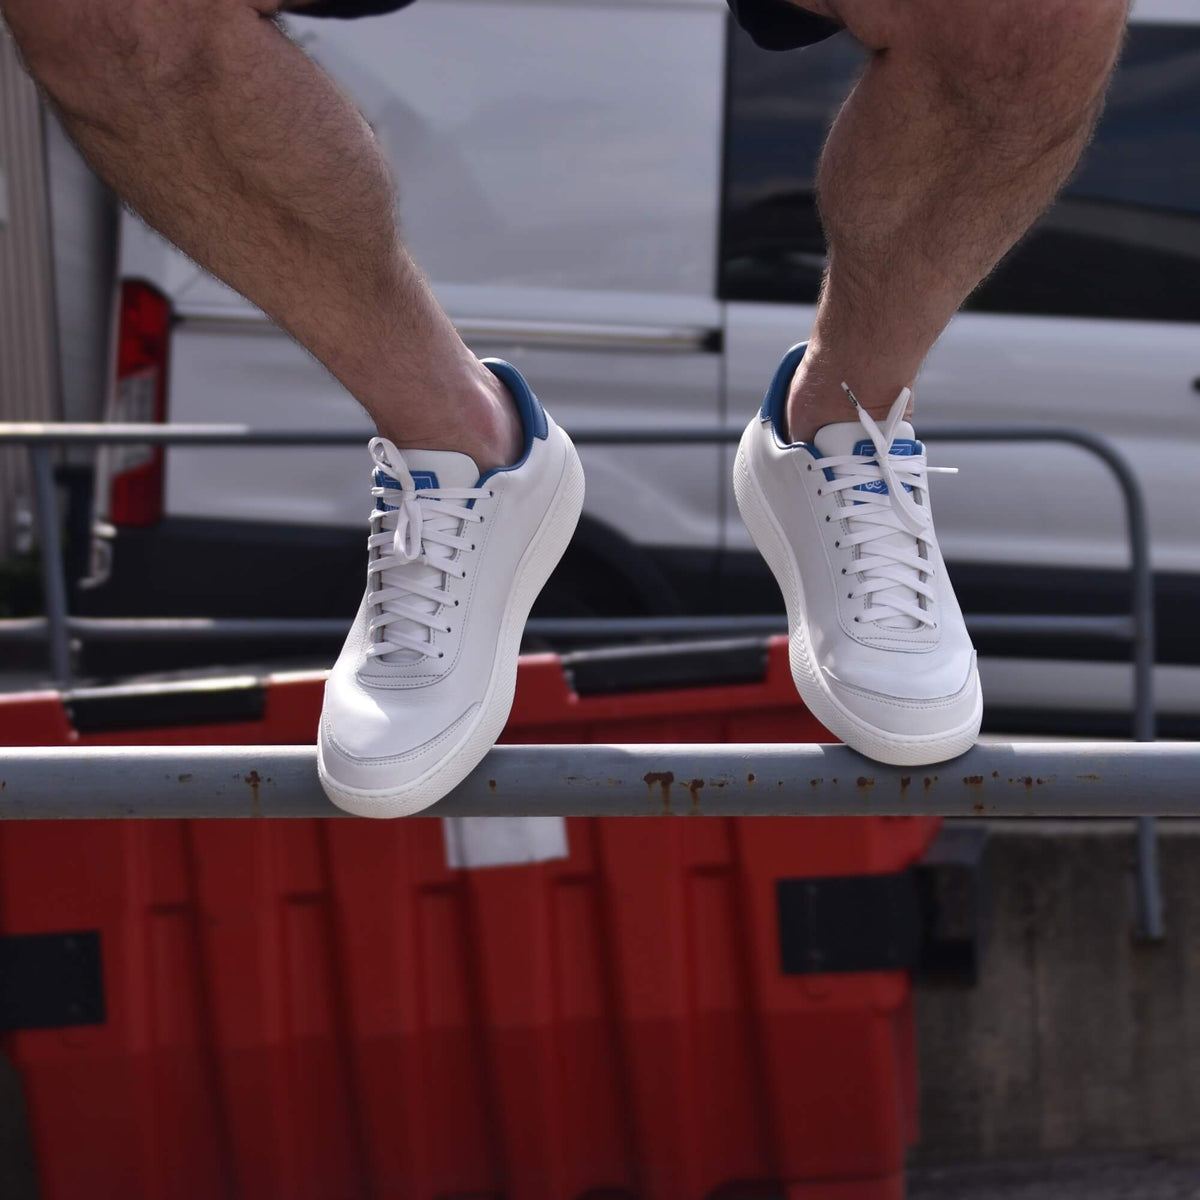 Man sat on a rail wearing white Hardwick sneakers seen from the shins down